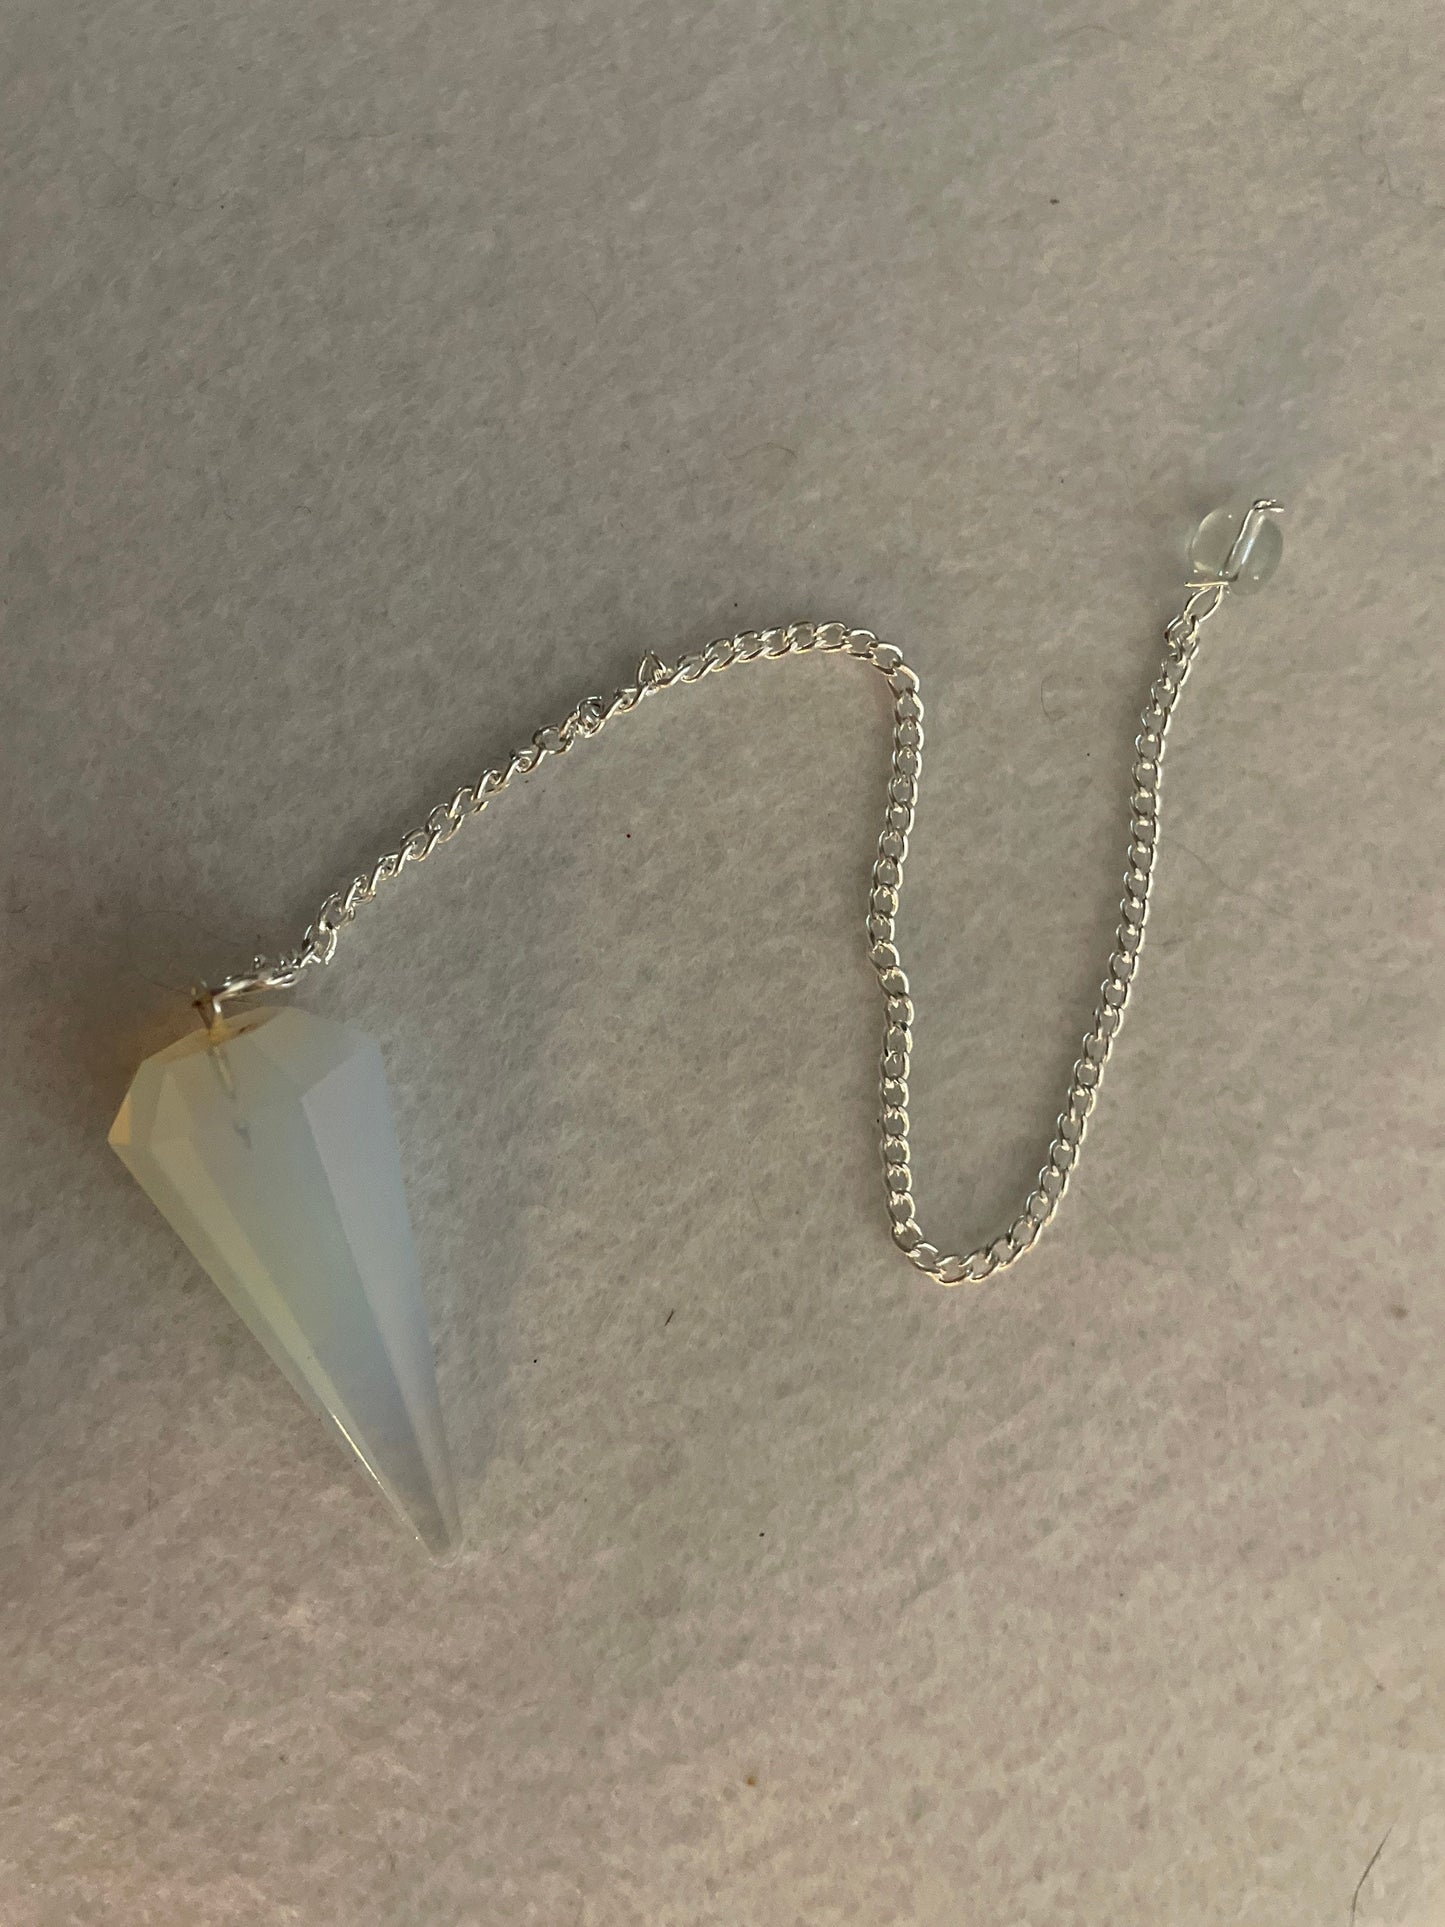 This beautiful  Opalite pendulum is approximately 1.65” and with chain is 8.5”